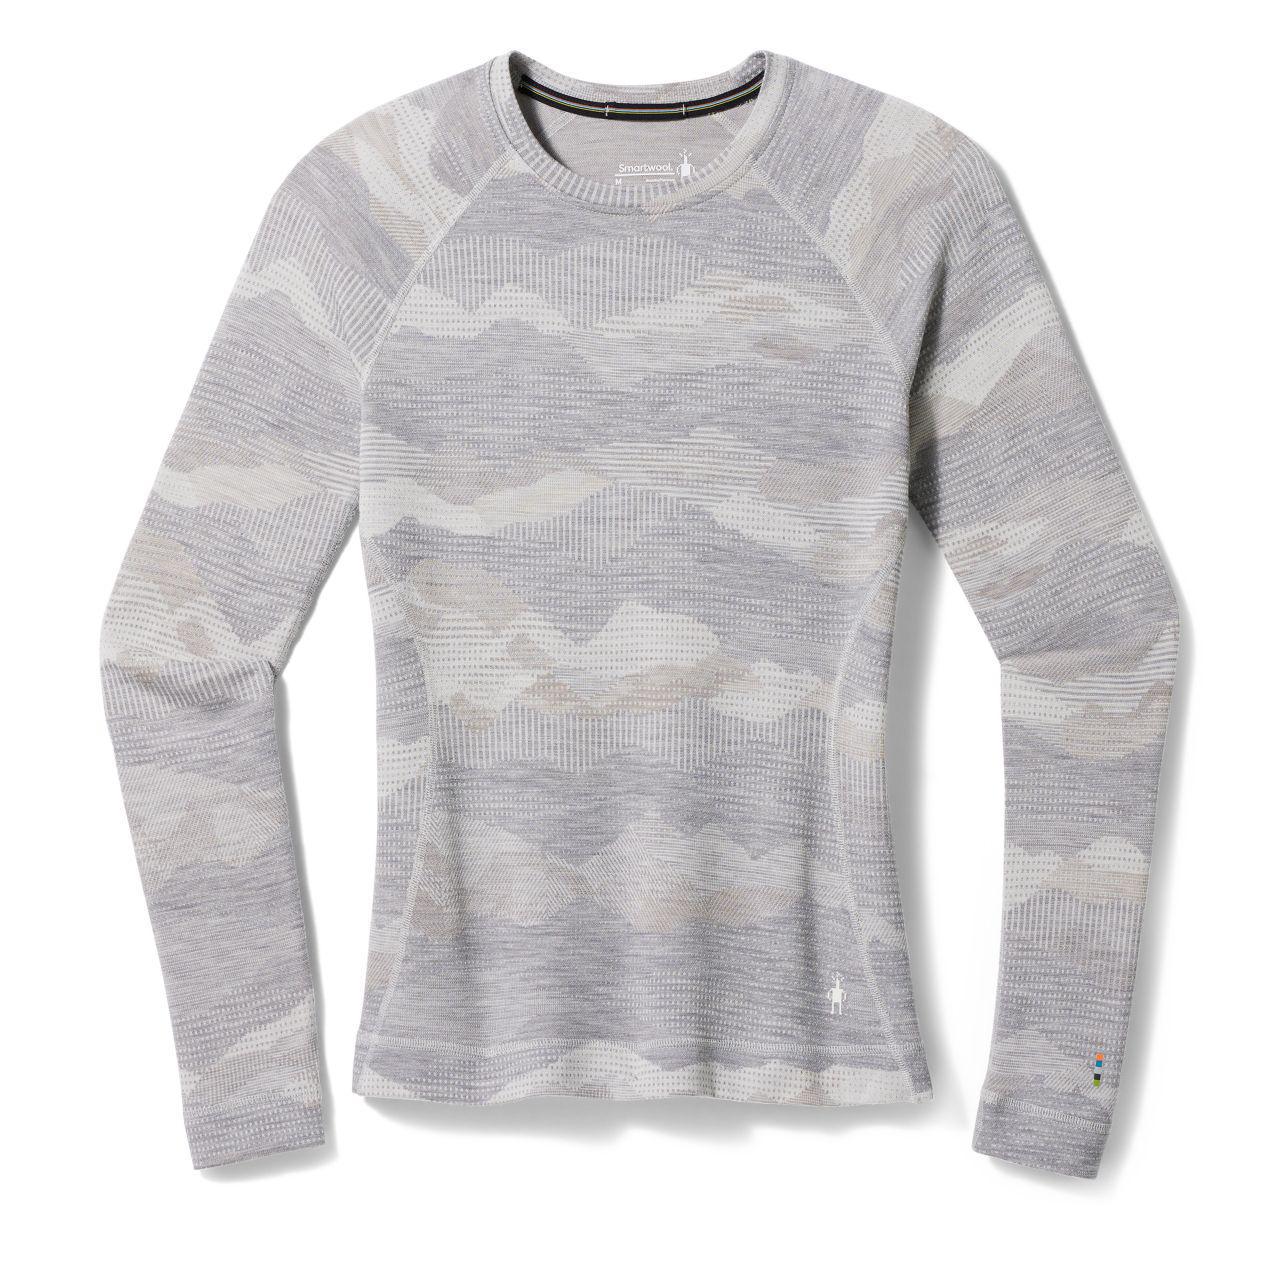 Smartwool-Women's Smartwool Classic Thermal Merino Base Layer Crew-Light Gray Mountain Scape-Pacers Running